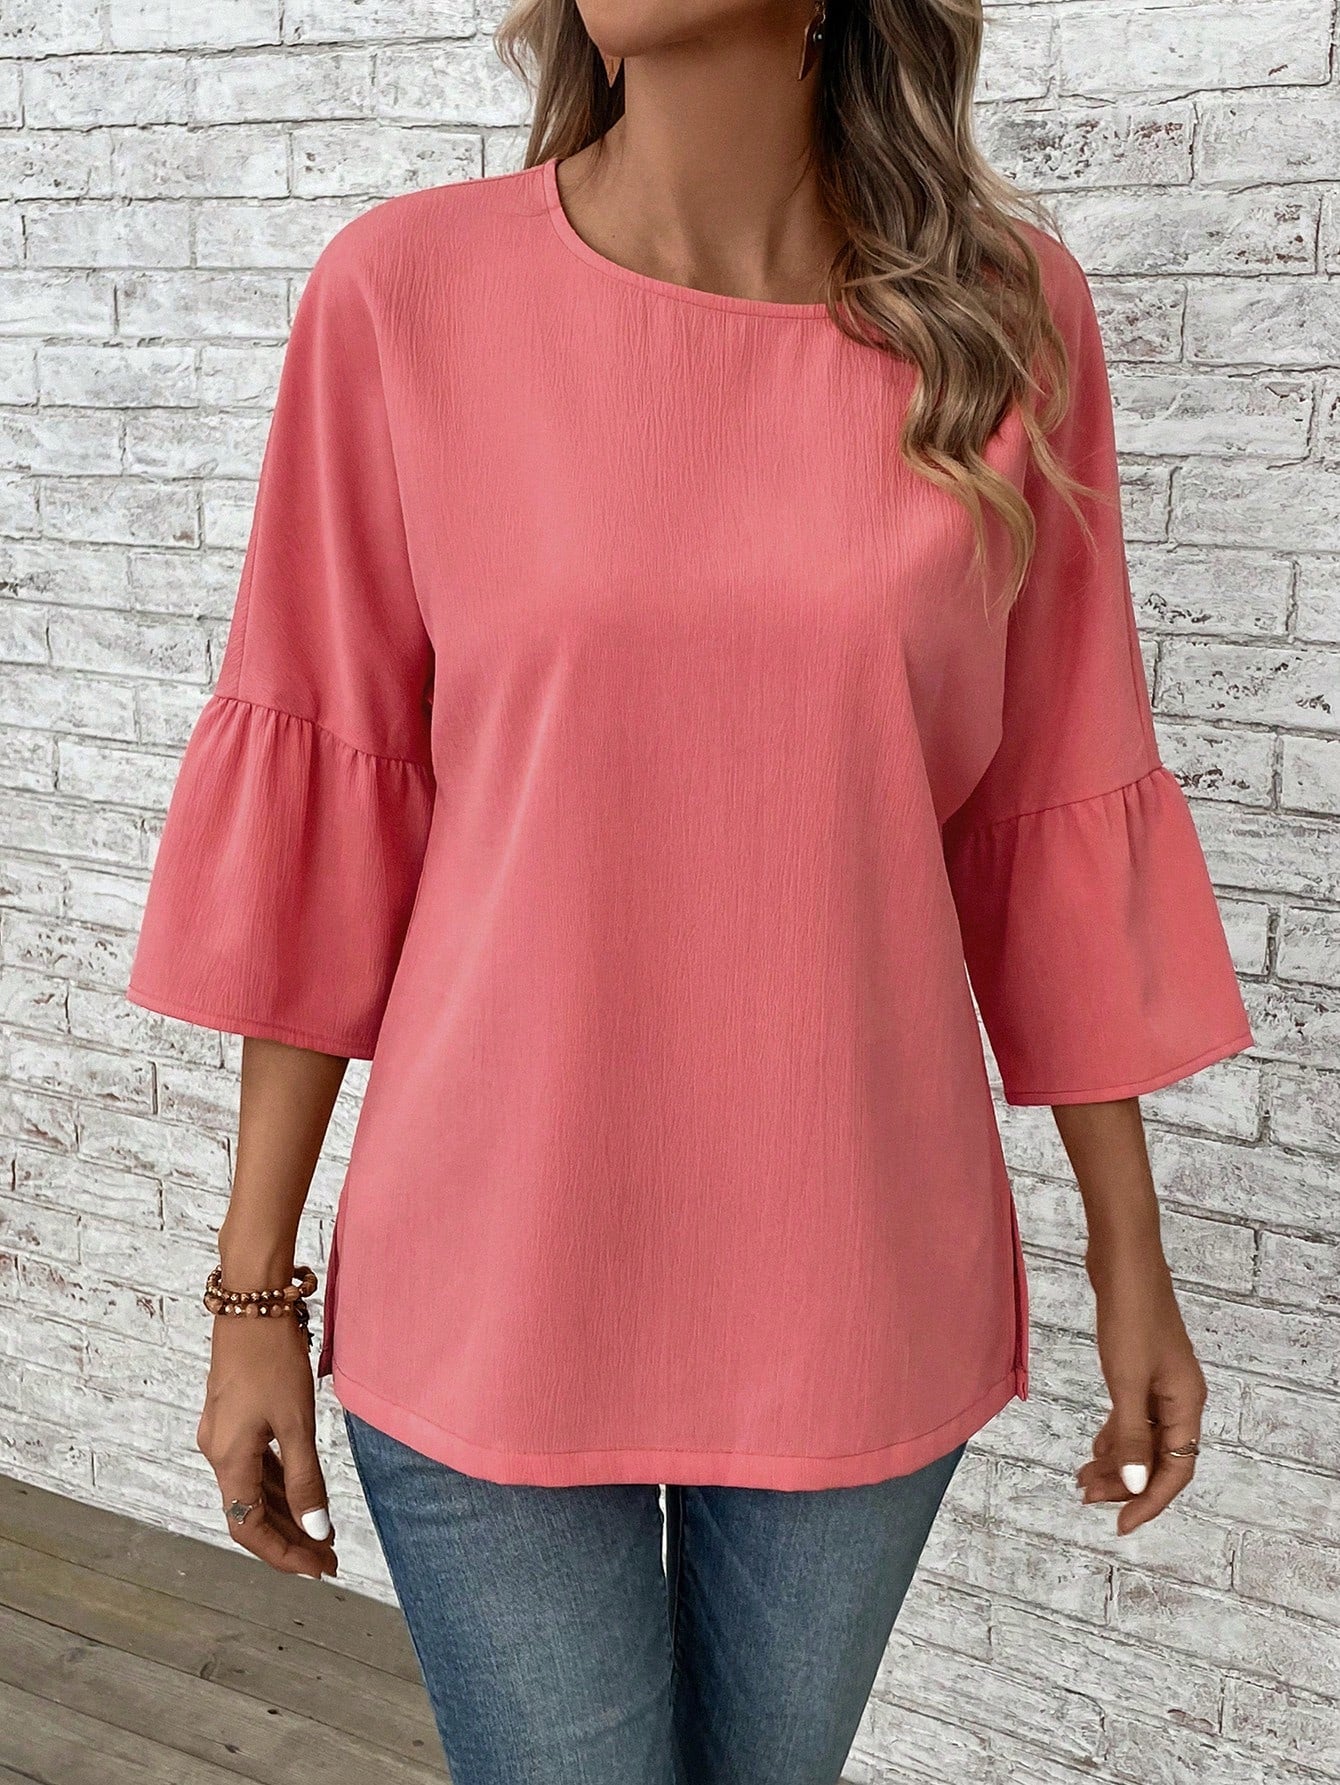 EMERY ROSE Solid Flare Sleeve Blouse